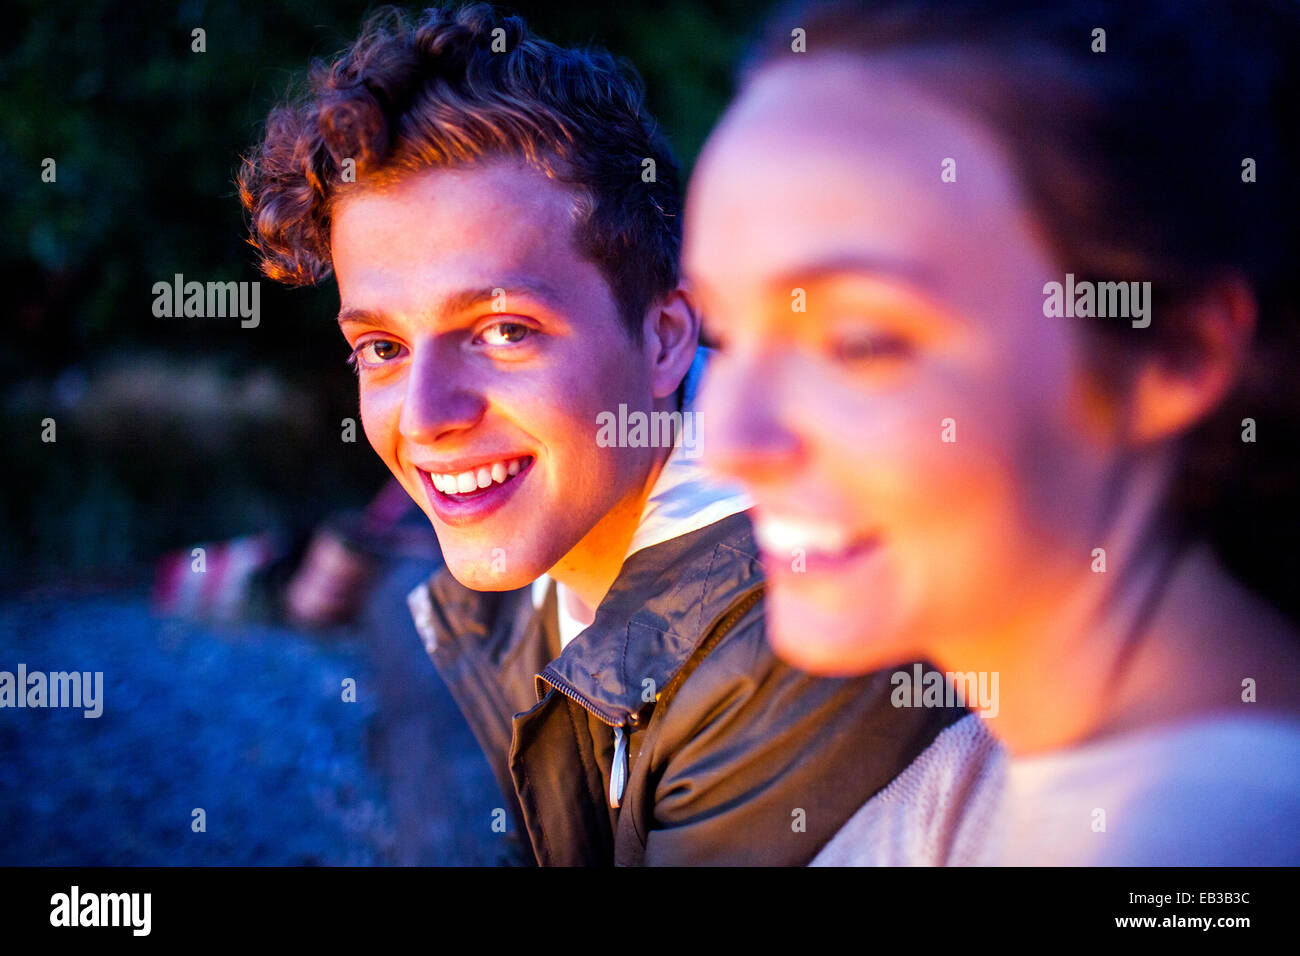 Caucasian couple relaxing together on beach at night Banque D'Images